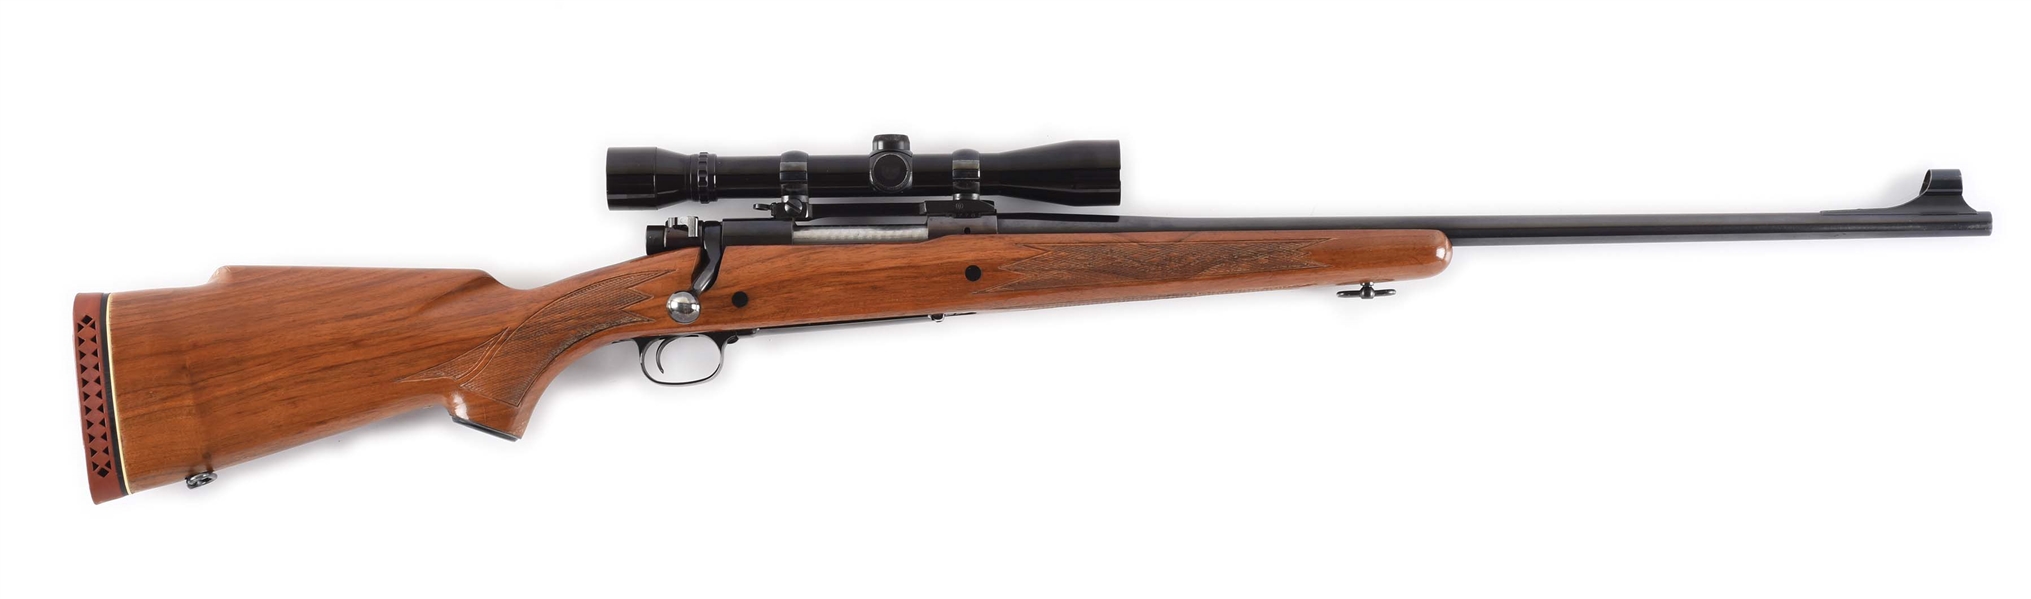 (M) WINCHESTER MODEL 70 BOLT ACTION RIFLE WITH SCOPE (1968).